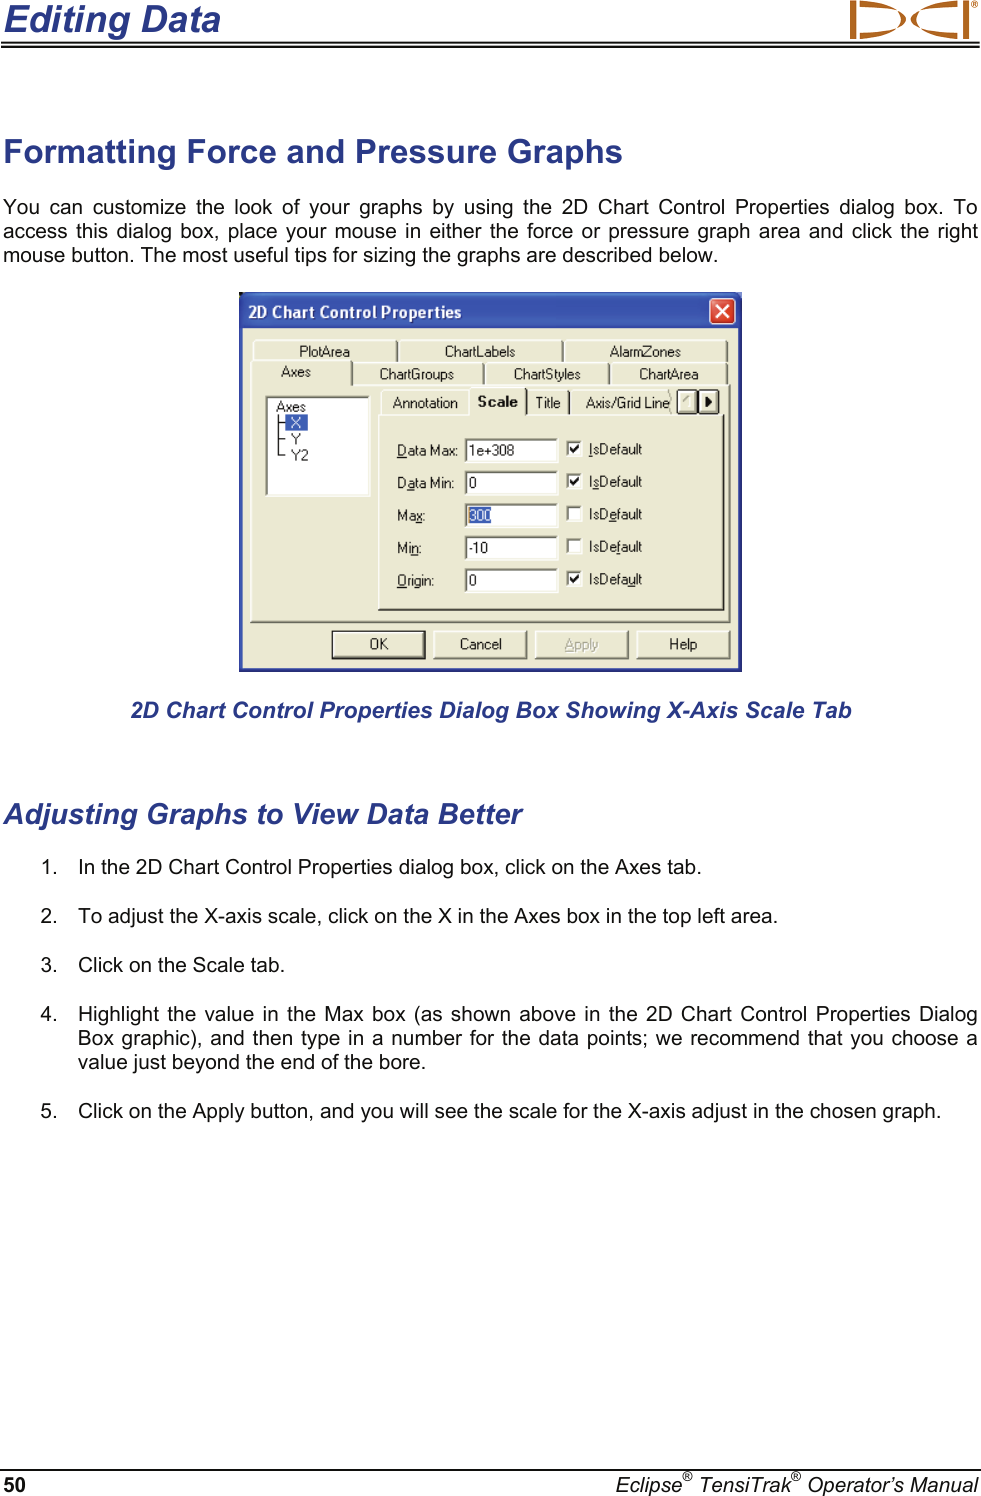 Editing Data  50  Eclipse® TensiTrak® Operator’s Manual Formatting Force and Pressure Graphs You can customize the look of your graphs by using the 2D Chart Control Properties dialog box. To access this dialog box, place your mouse in either the force or pressure graph area and click the right mouse button. The most useful tips for sizing the graphs are described below.  2D Chart Control Properties Dialog Box Showing X-Axis Scale Tab  Adjusting Graphs to View Data Better 1.  In the 2D Chart Control Properties dialog box, click on the Axes tab. 2.  To adjust the X-axis scale, click on the X in the Axes box in the top left area. 3.  Click on the Scale tab. 4.  Highlight the value in the Max box (as shown above in the 2D Chart Control Properties Dialog Box graphic), and then type in a number for the data points; we recommend that you choose a value just beyond the end of the bore. 5.  Click on the Apply button, and you will see the scale for the X-axis adjust in the chosen graph. 